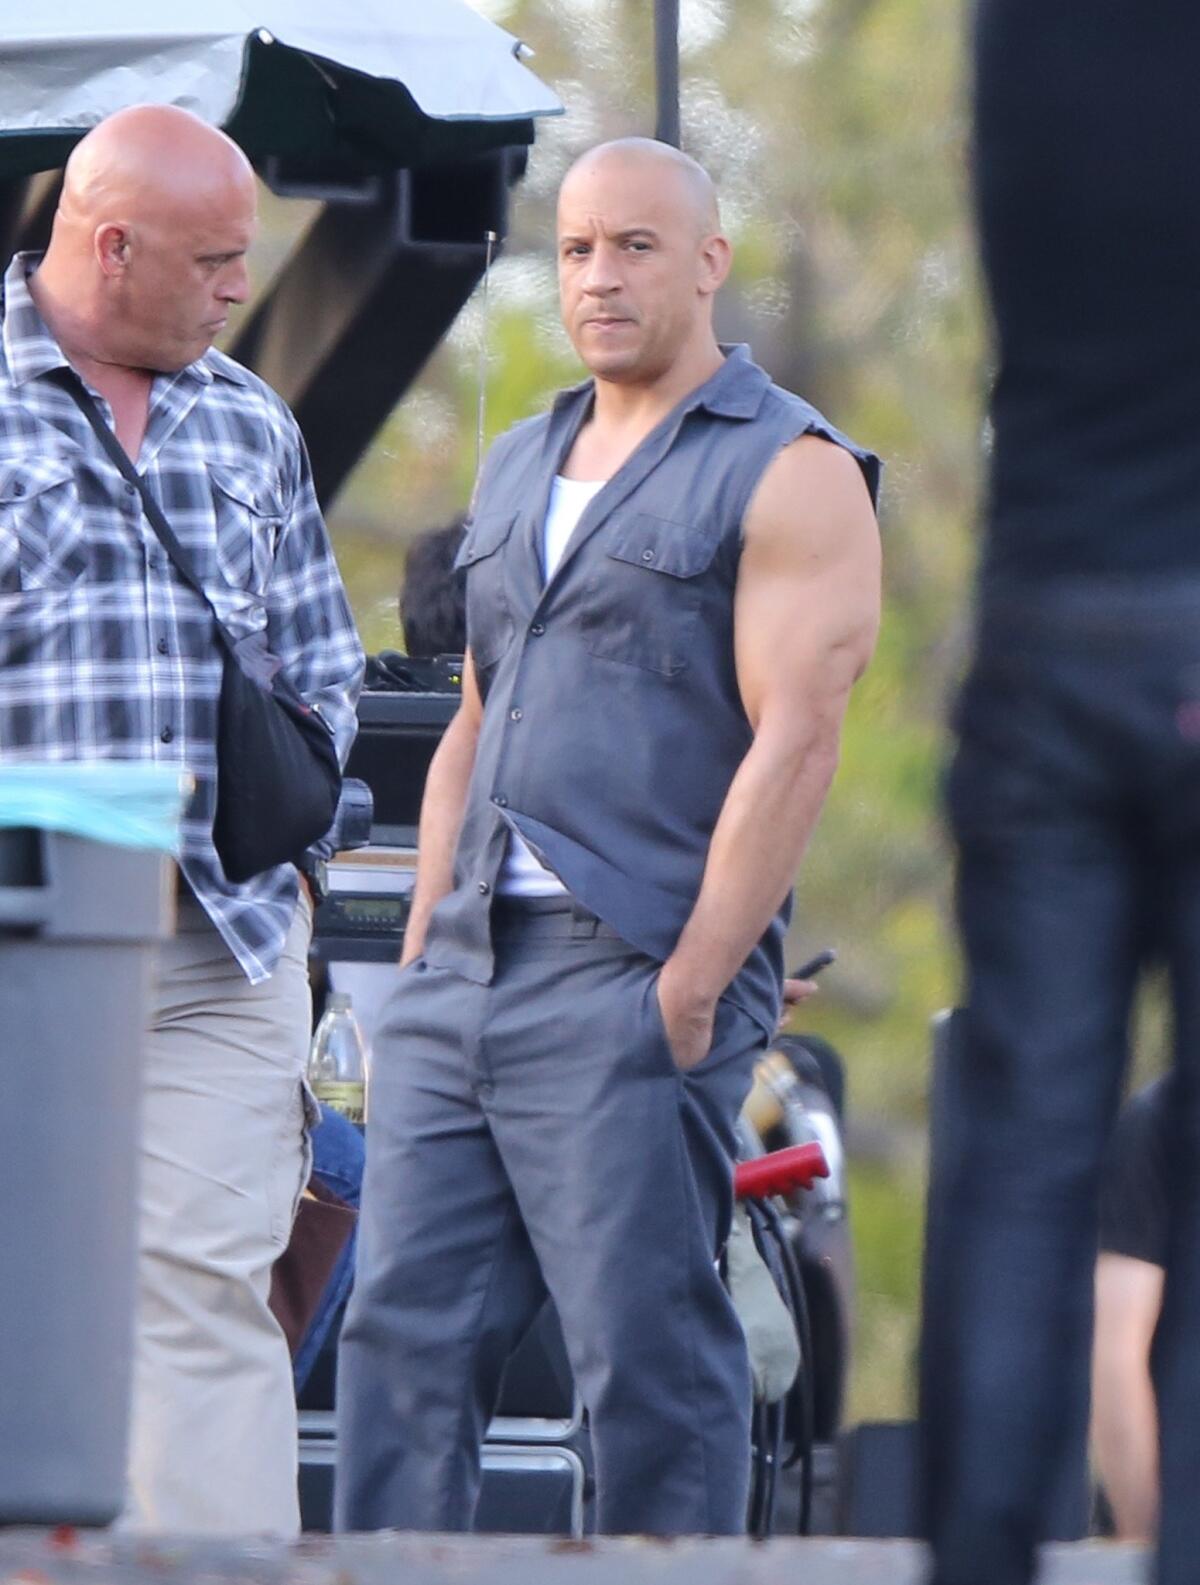 Vin Diesel films "Fast & Furious 7" in 2014 in Los Angeles. (TSM/Bauer-Griffin/GC Images)